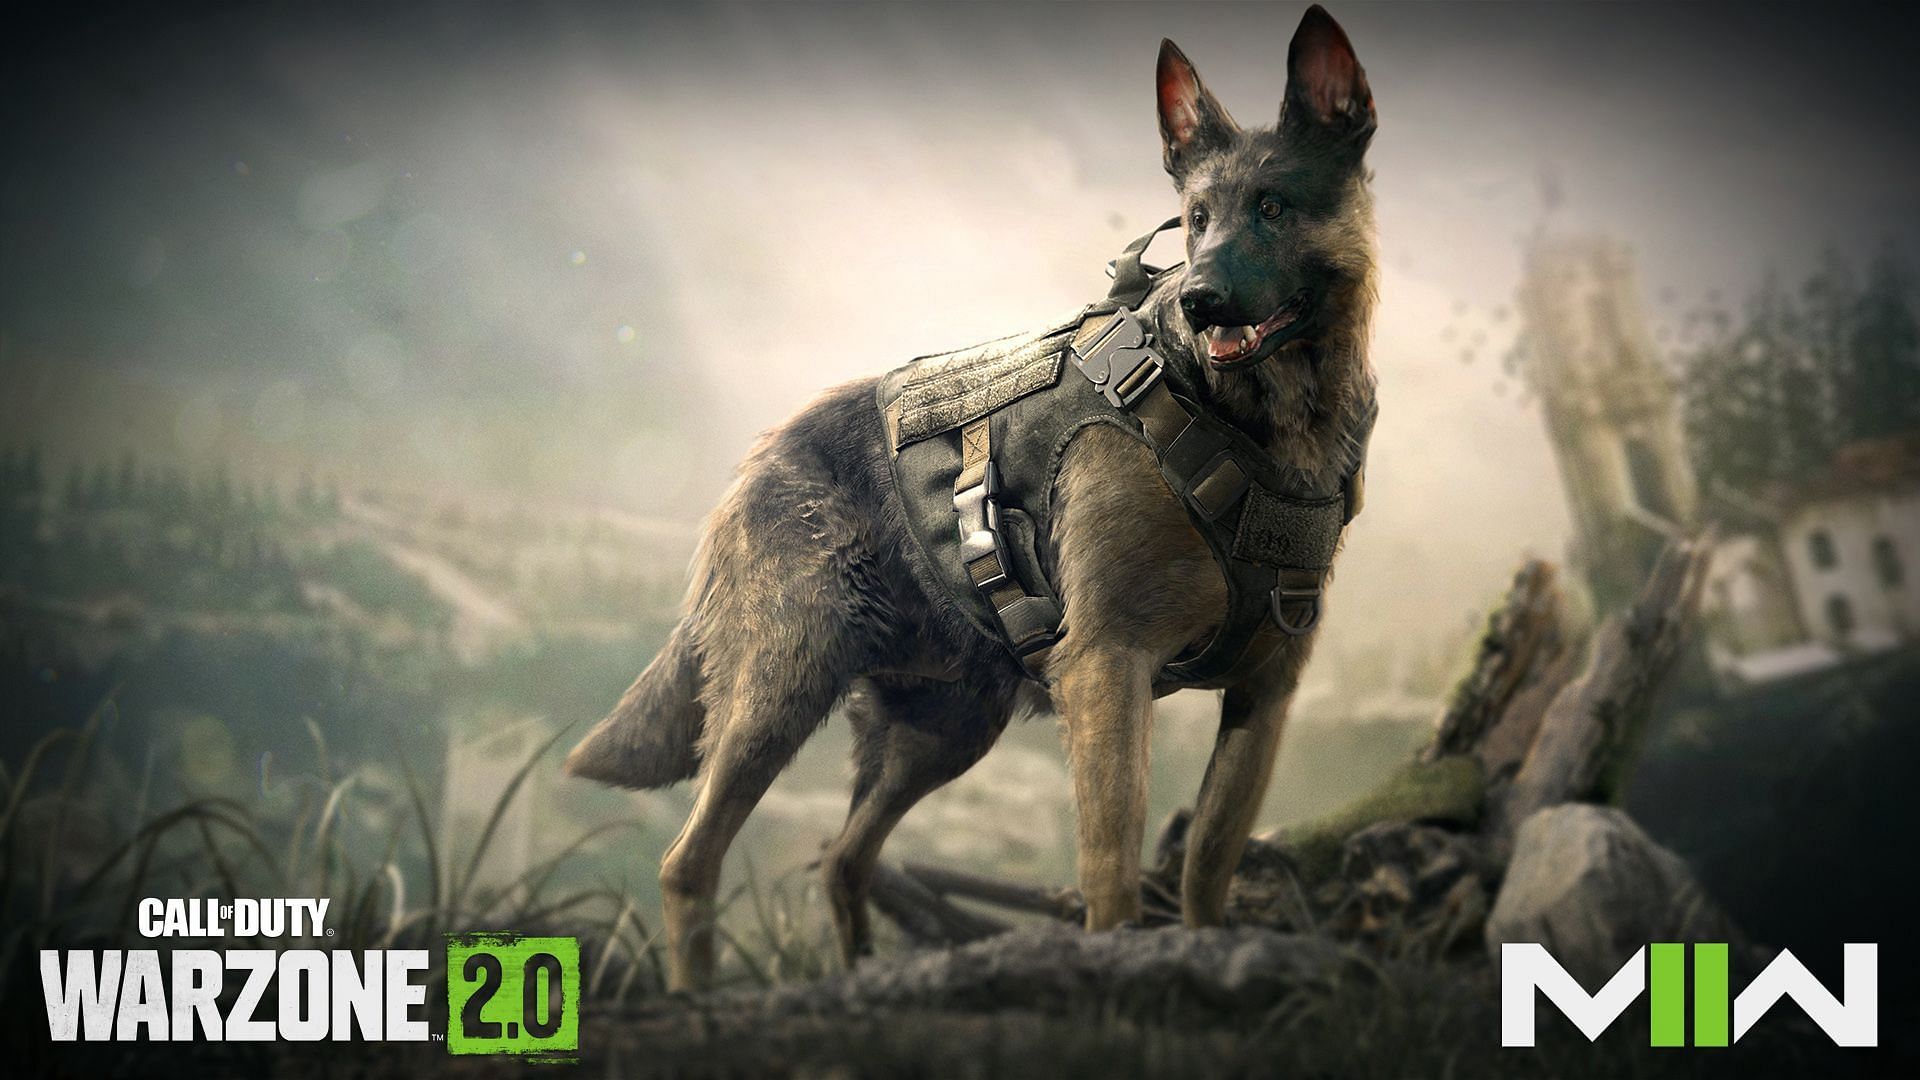 call of duty ghosts dog wallpaper